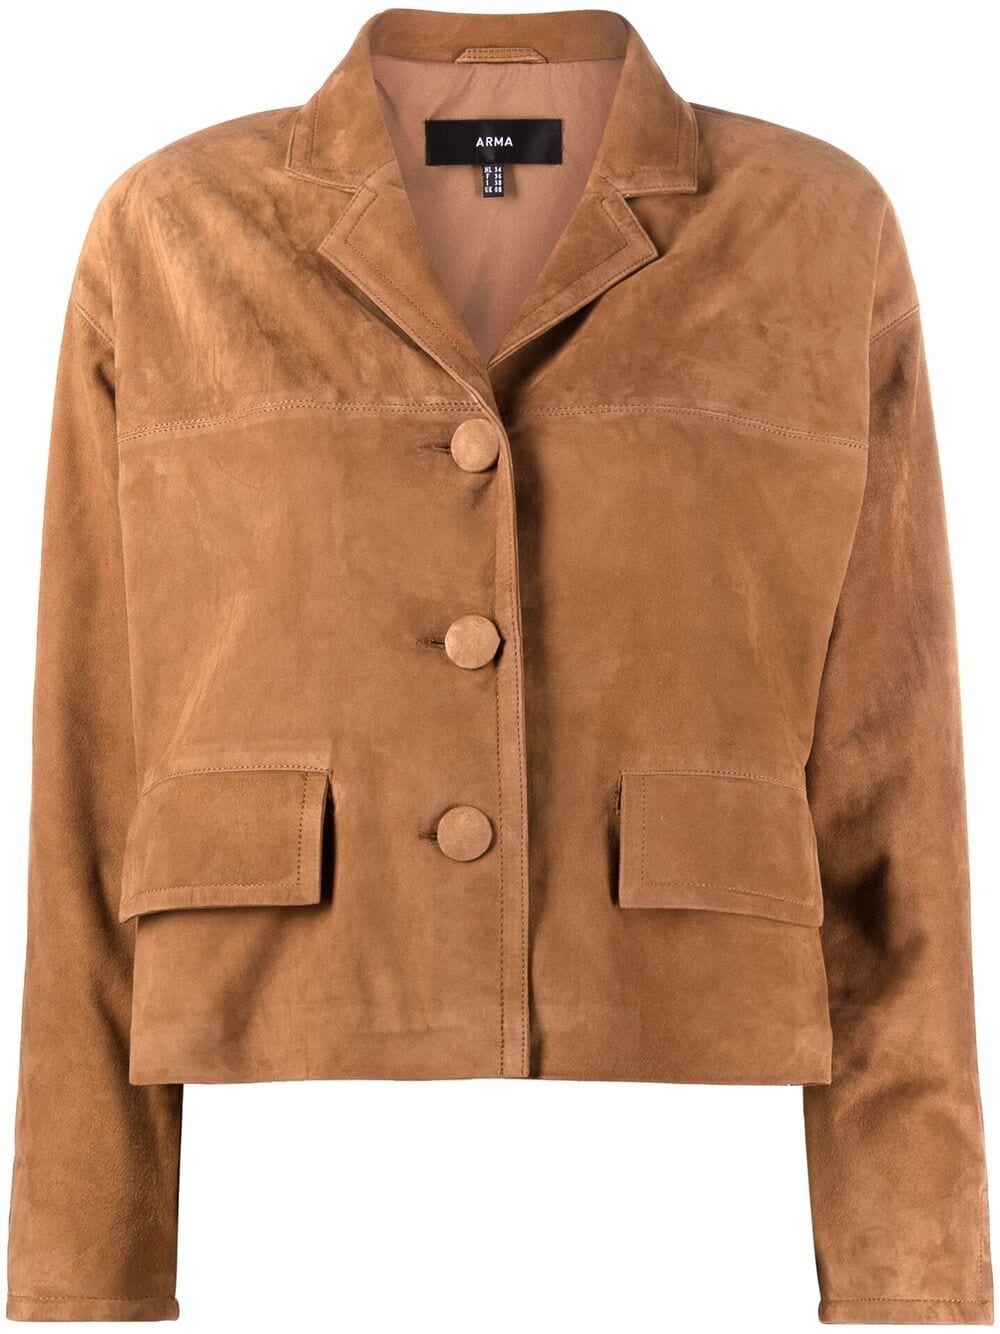 Arma Cropped Suede Jacket In Brown